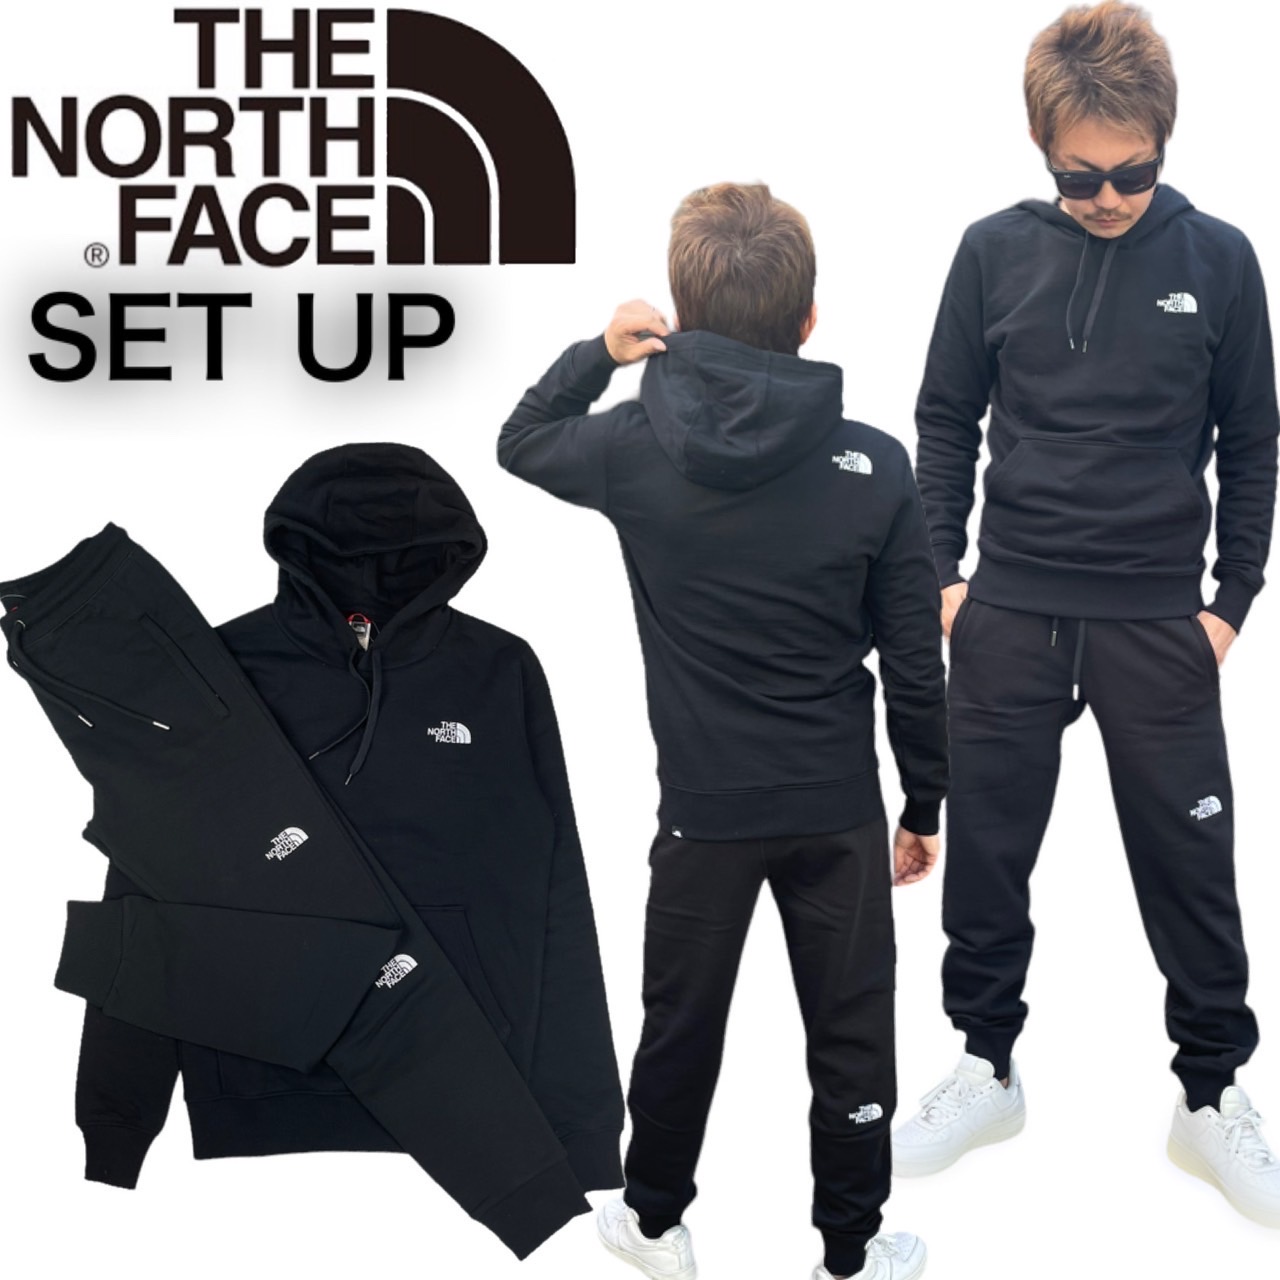 THE NORTH FACE／ジャージ上下セット(上L・下M)